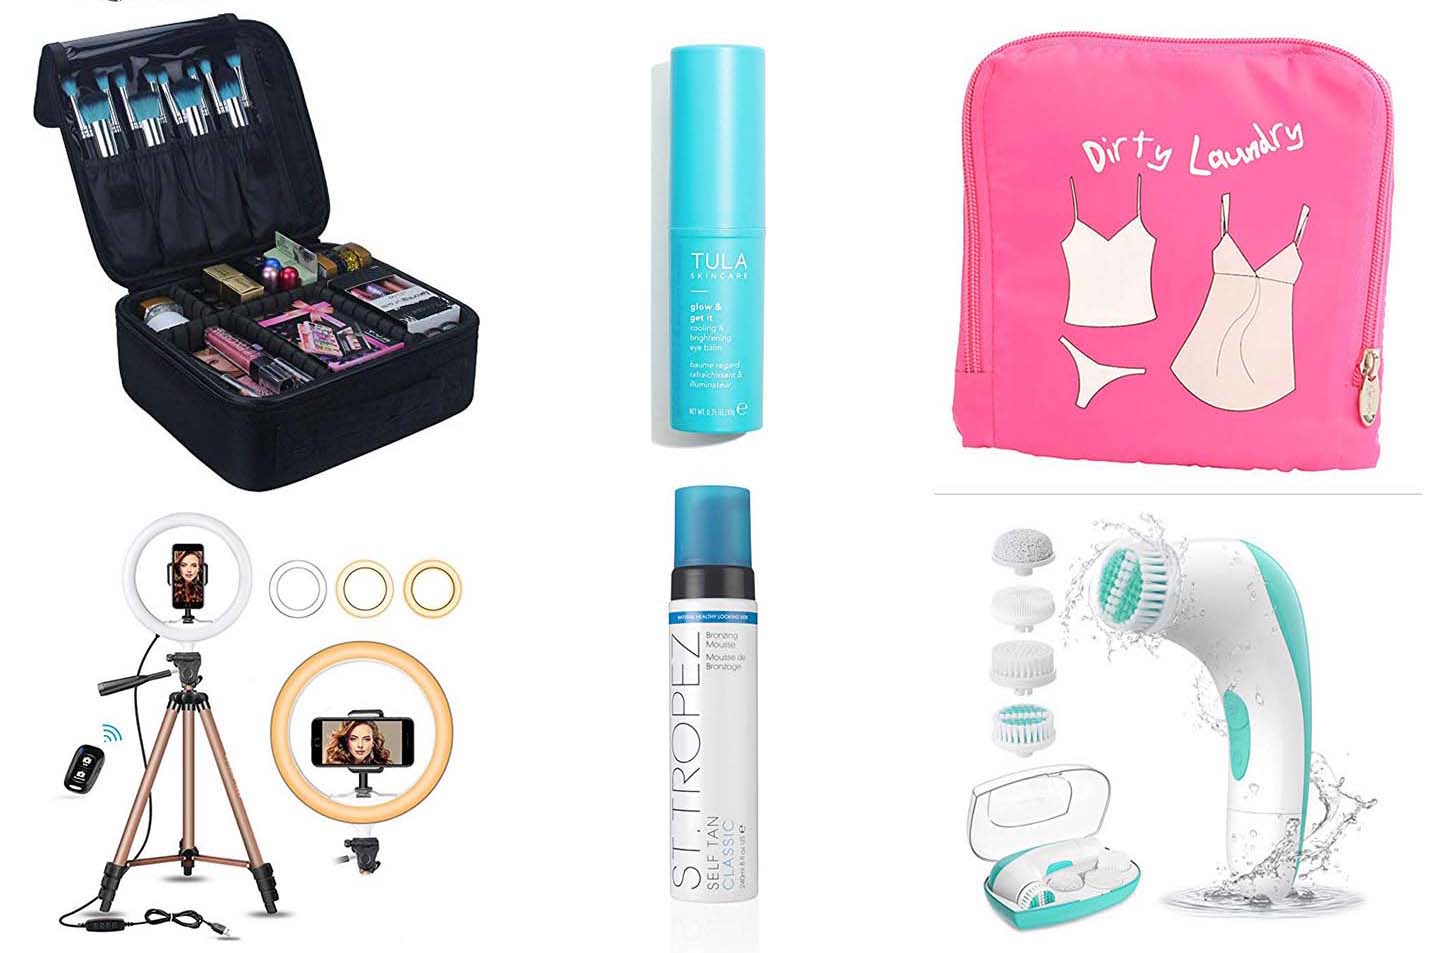 Amazon Prime Day One Beauty Favorites